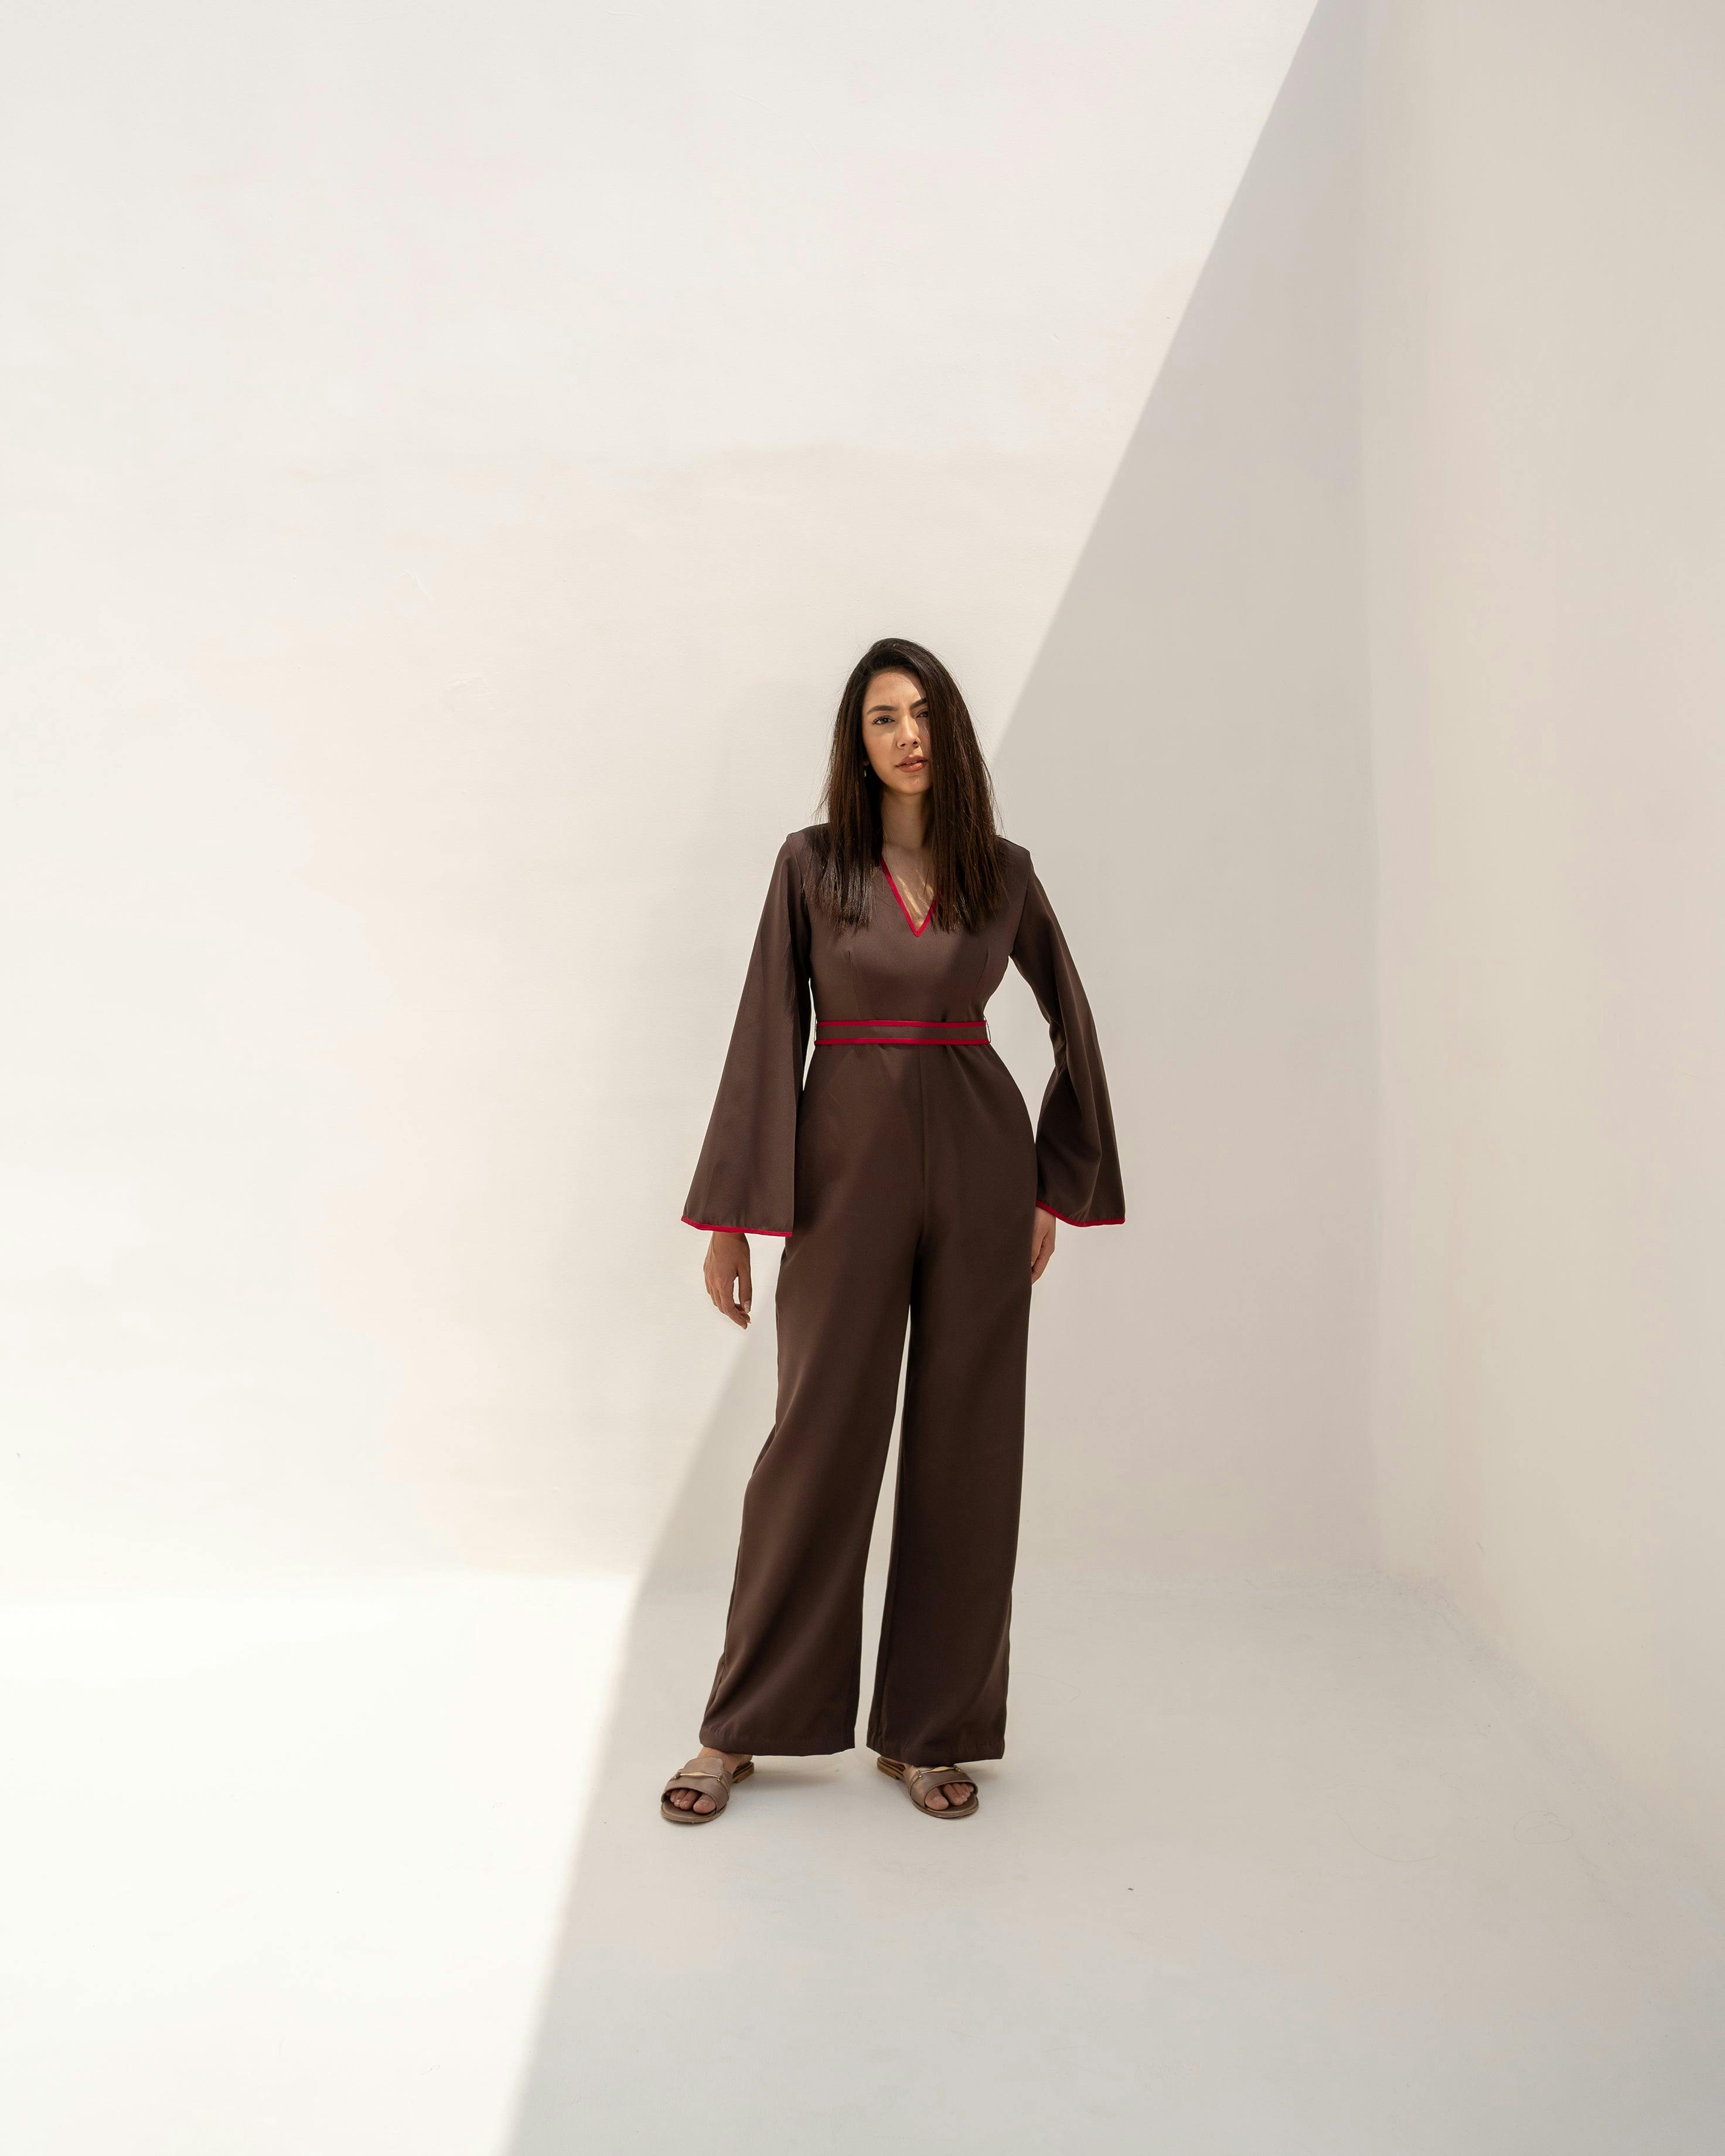 Brown and pink Jumpsuit, a product by Kritika Madan